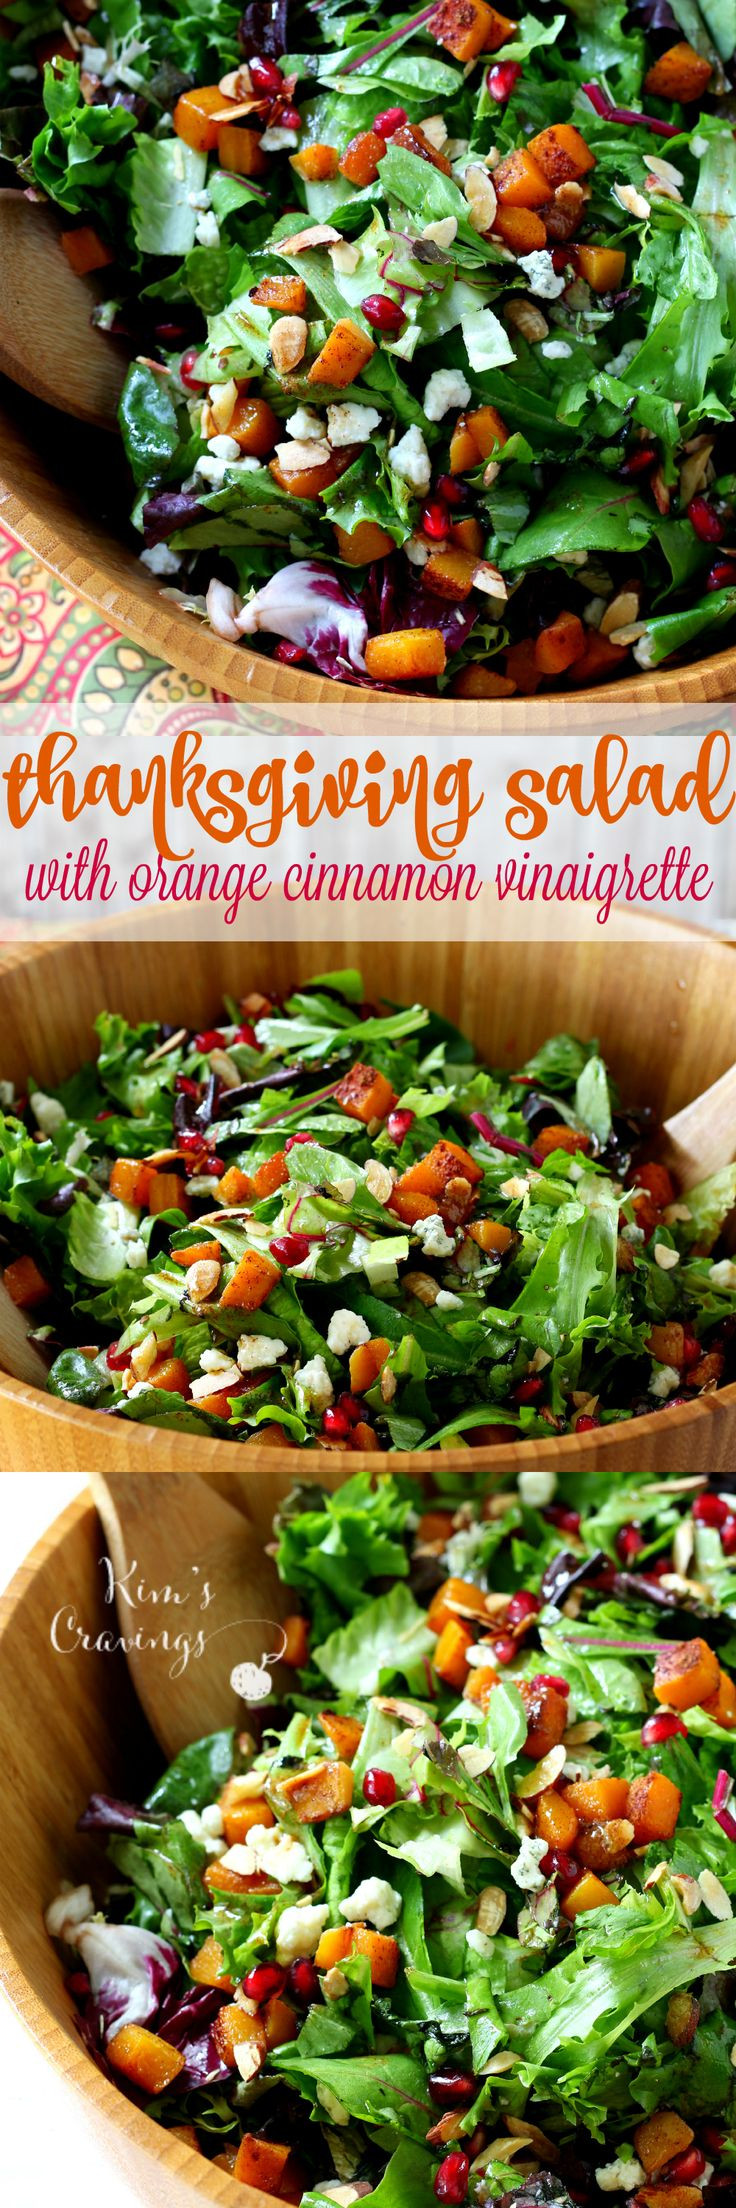 Best Salads For Thanksgiving
 17 Best ideas about Thanksgiving Salad on Pinterest